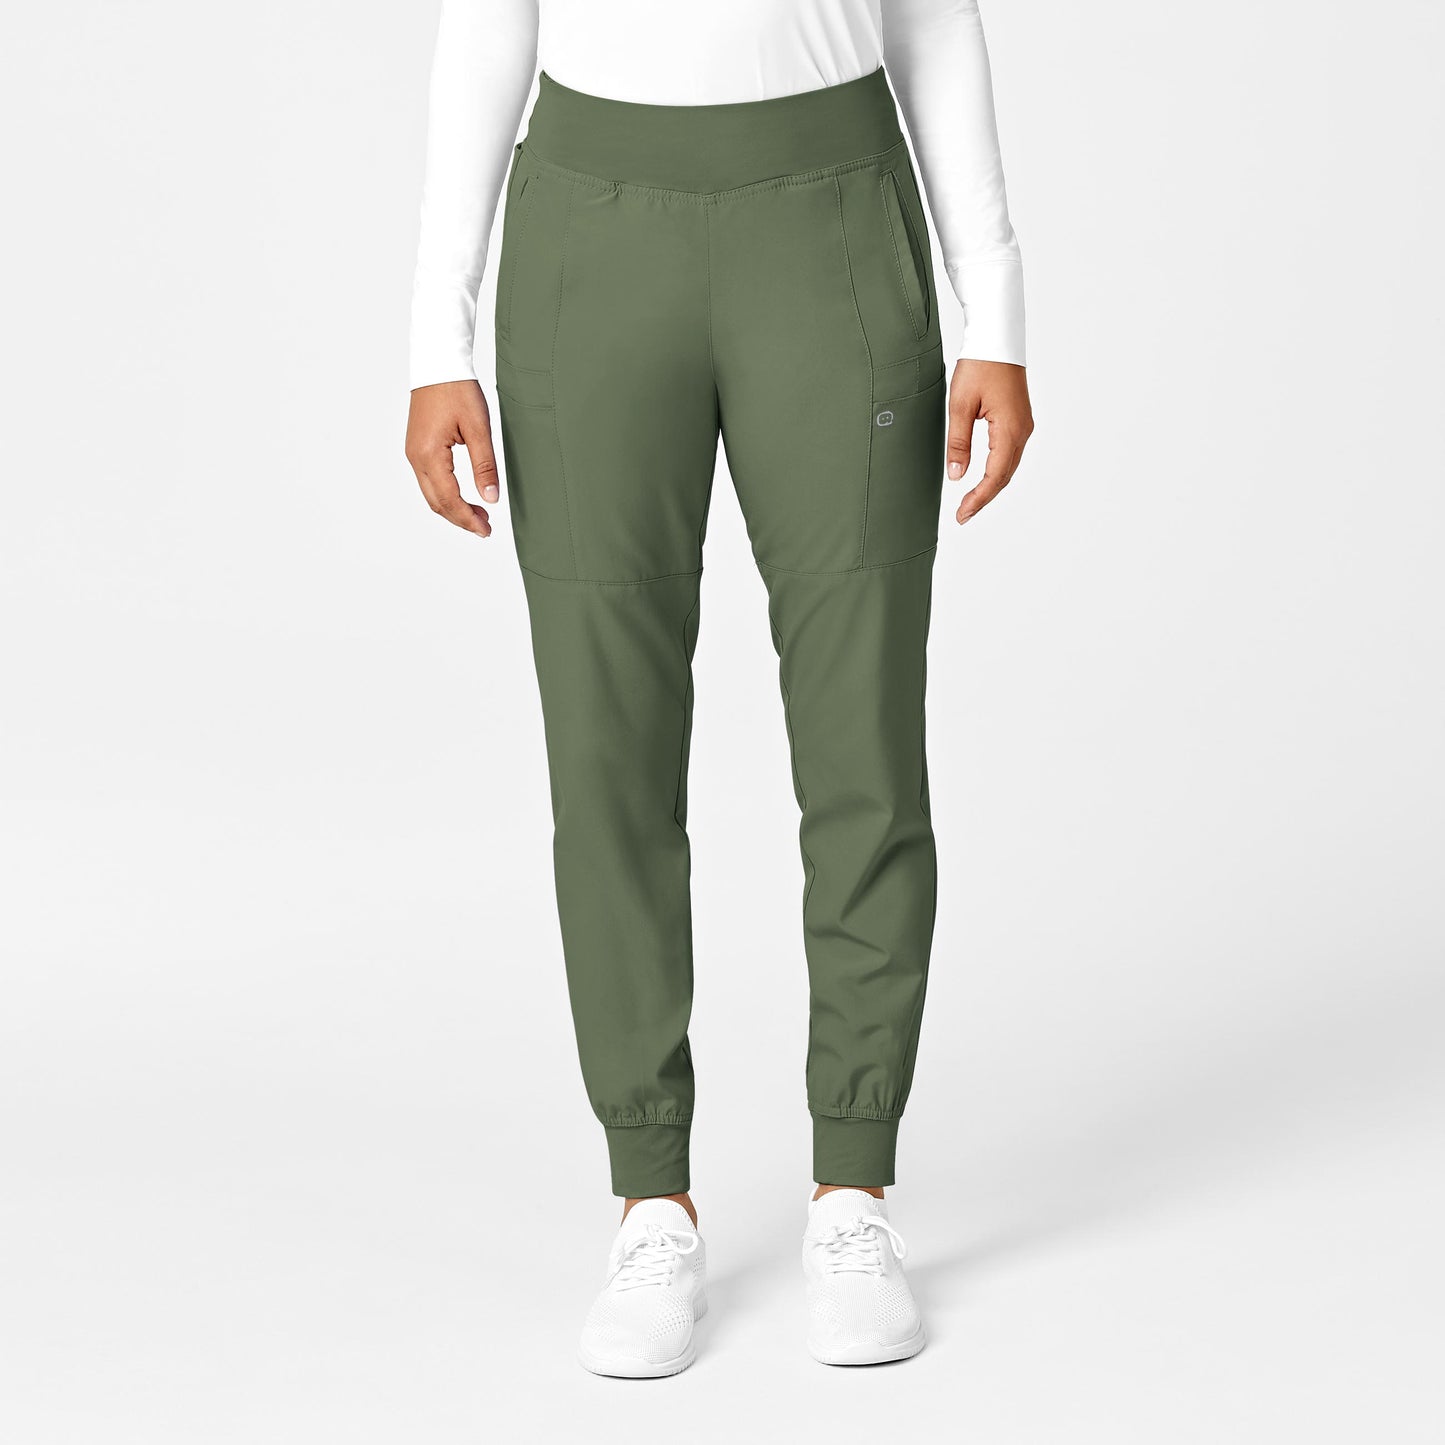 Women's W123 Jogger Pant in Black and Olive